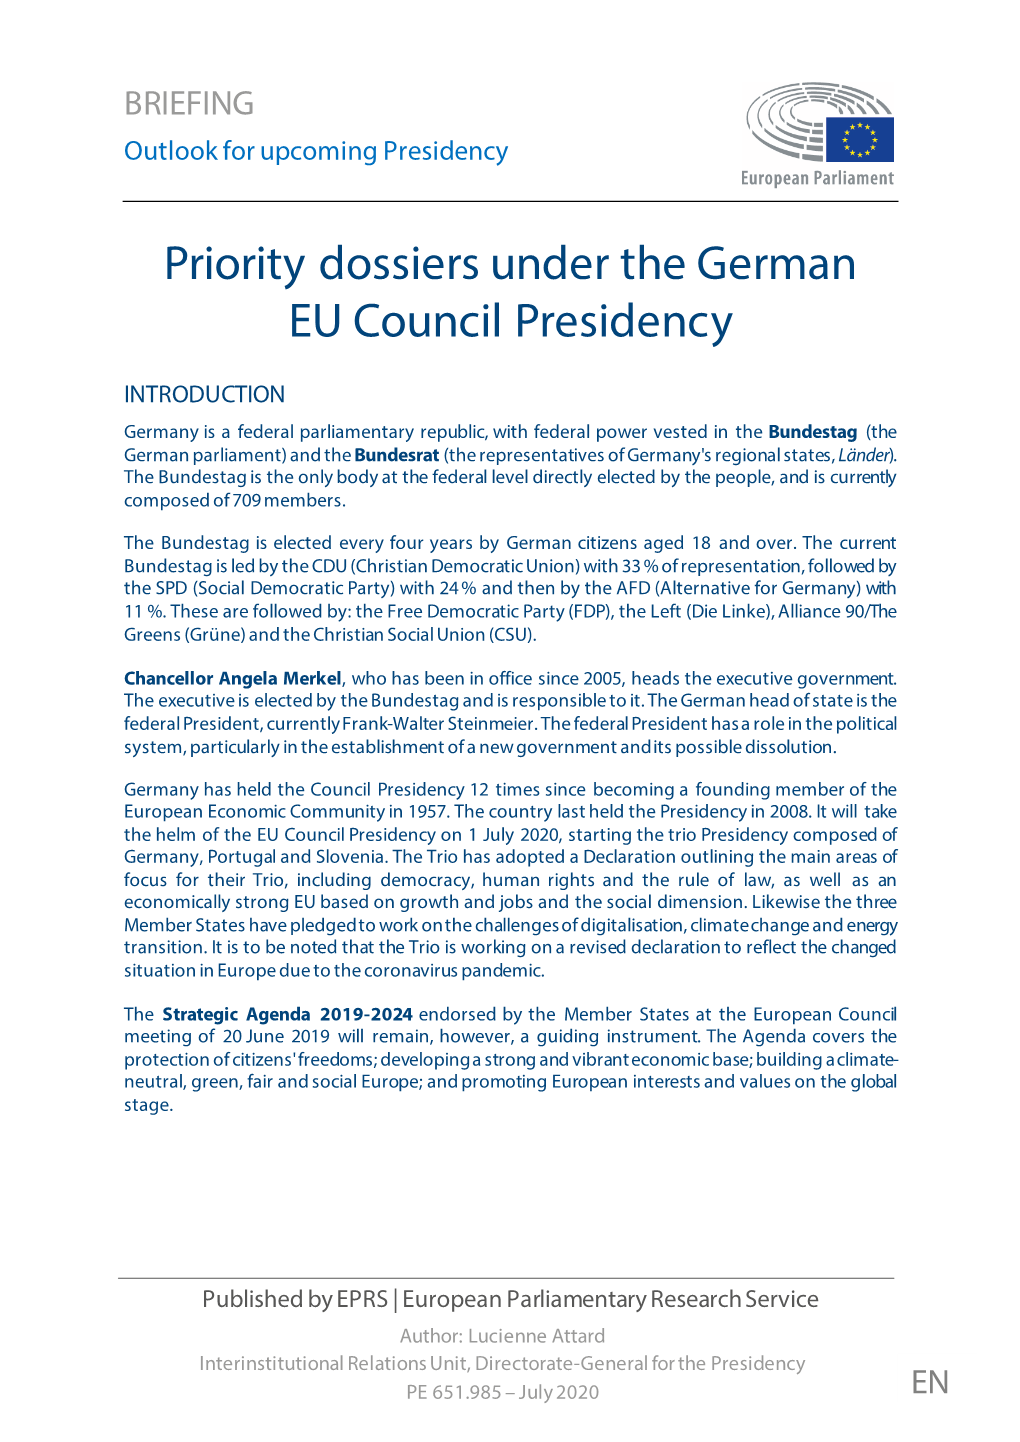 Priority Dossiers Under the German EU Council Presidency